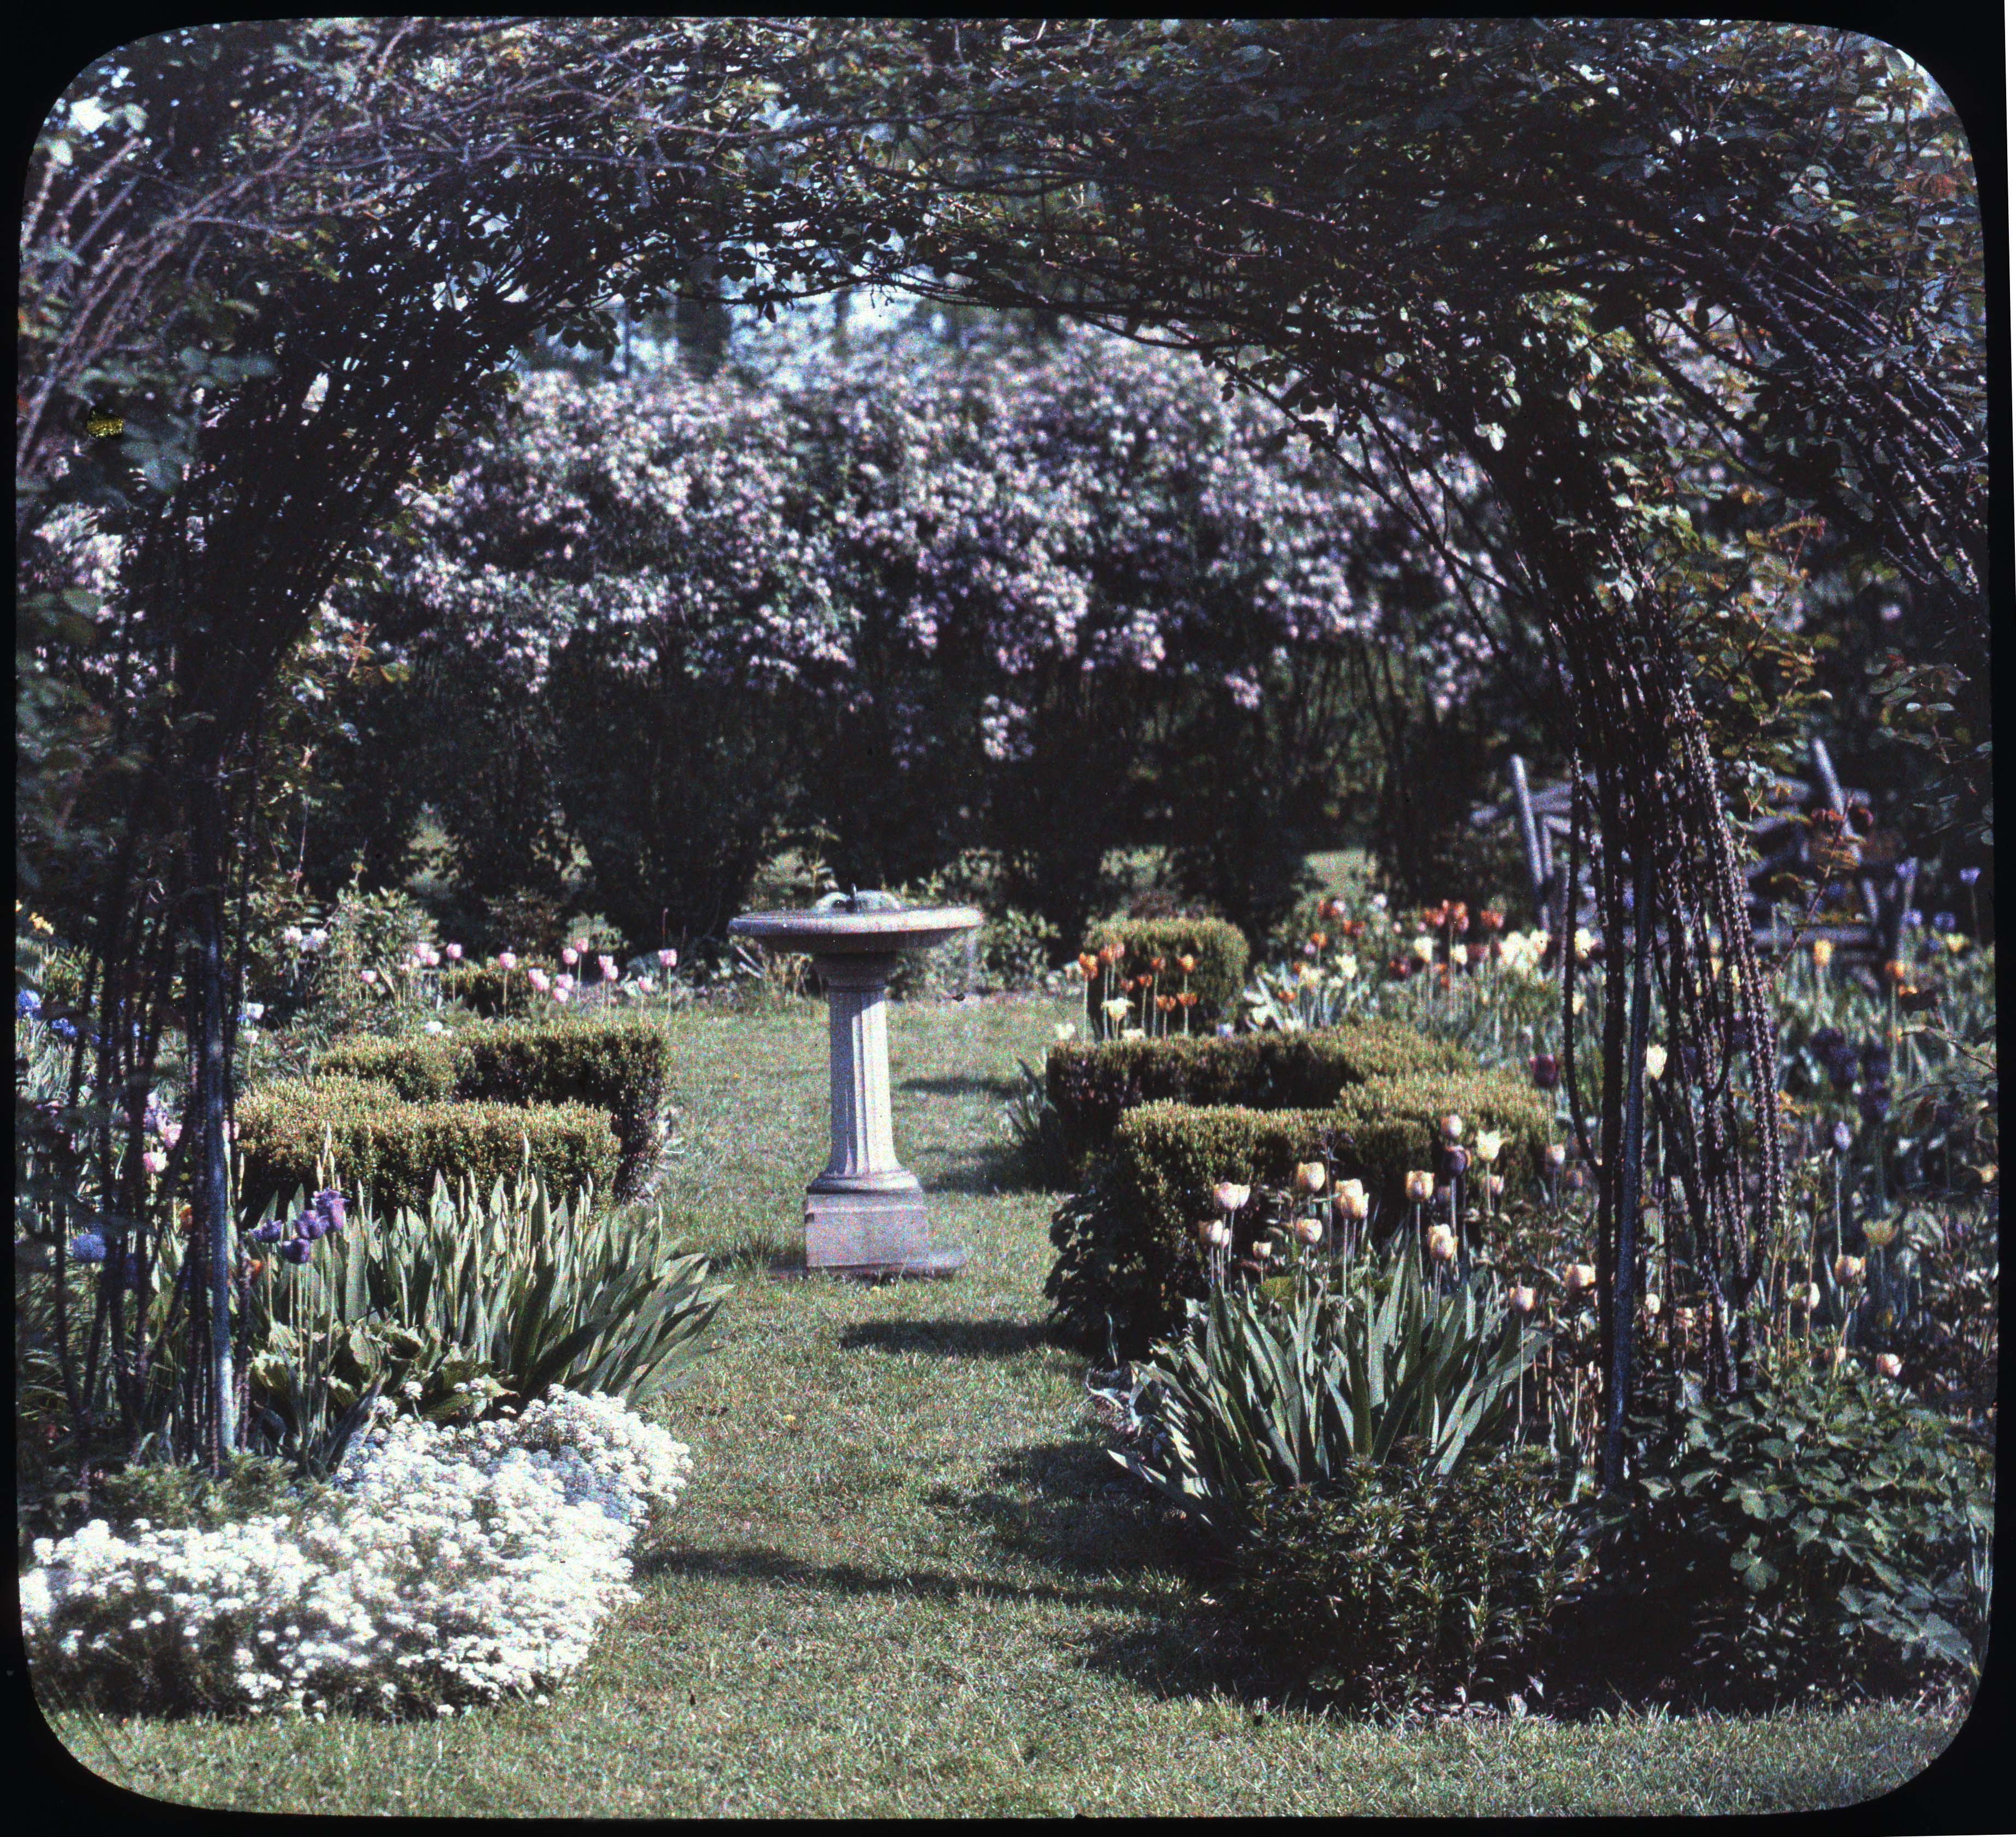 Autochrome transparency showing a trellised garden with candytuft, tulips and ionicera.